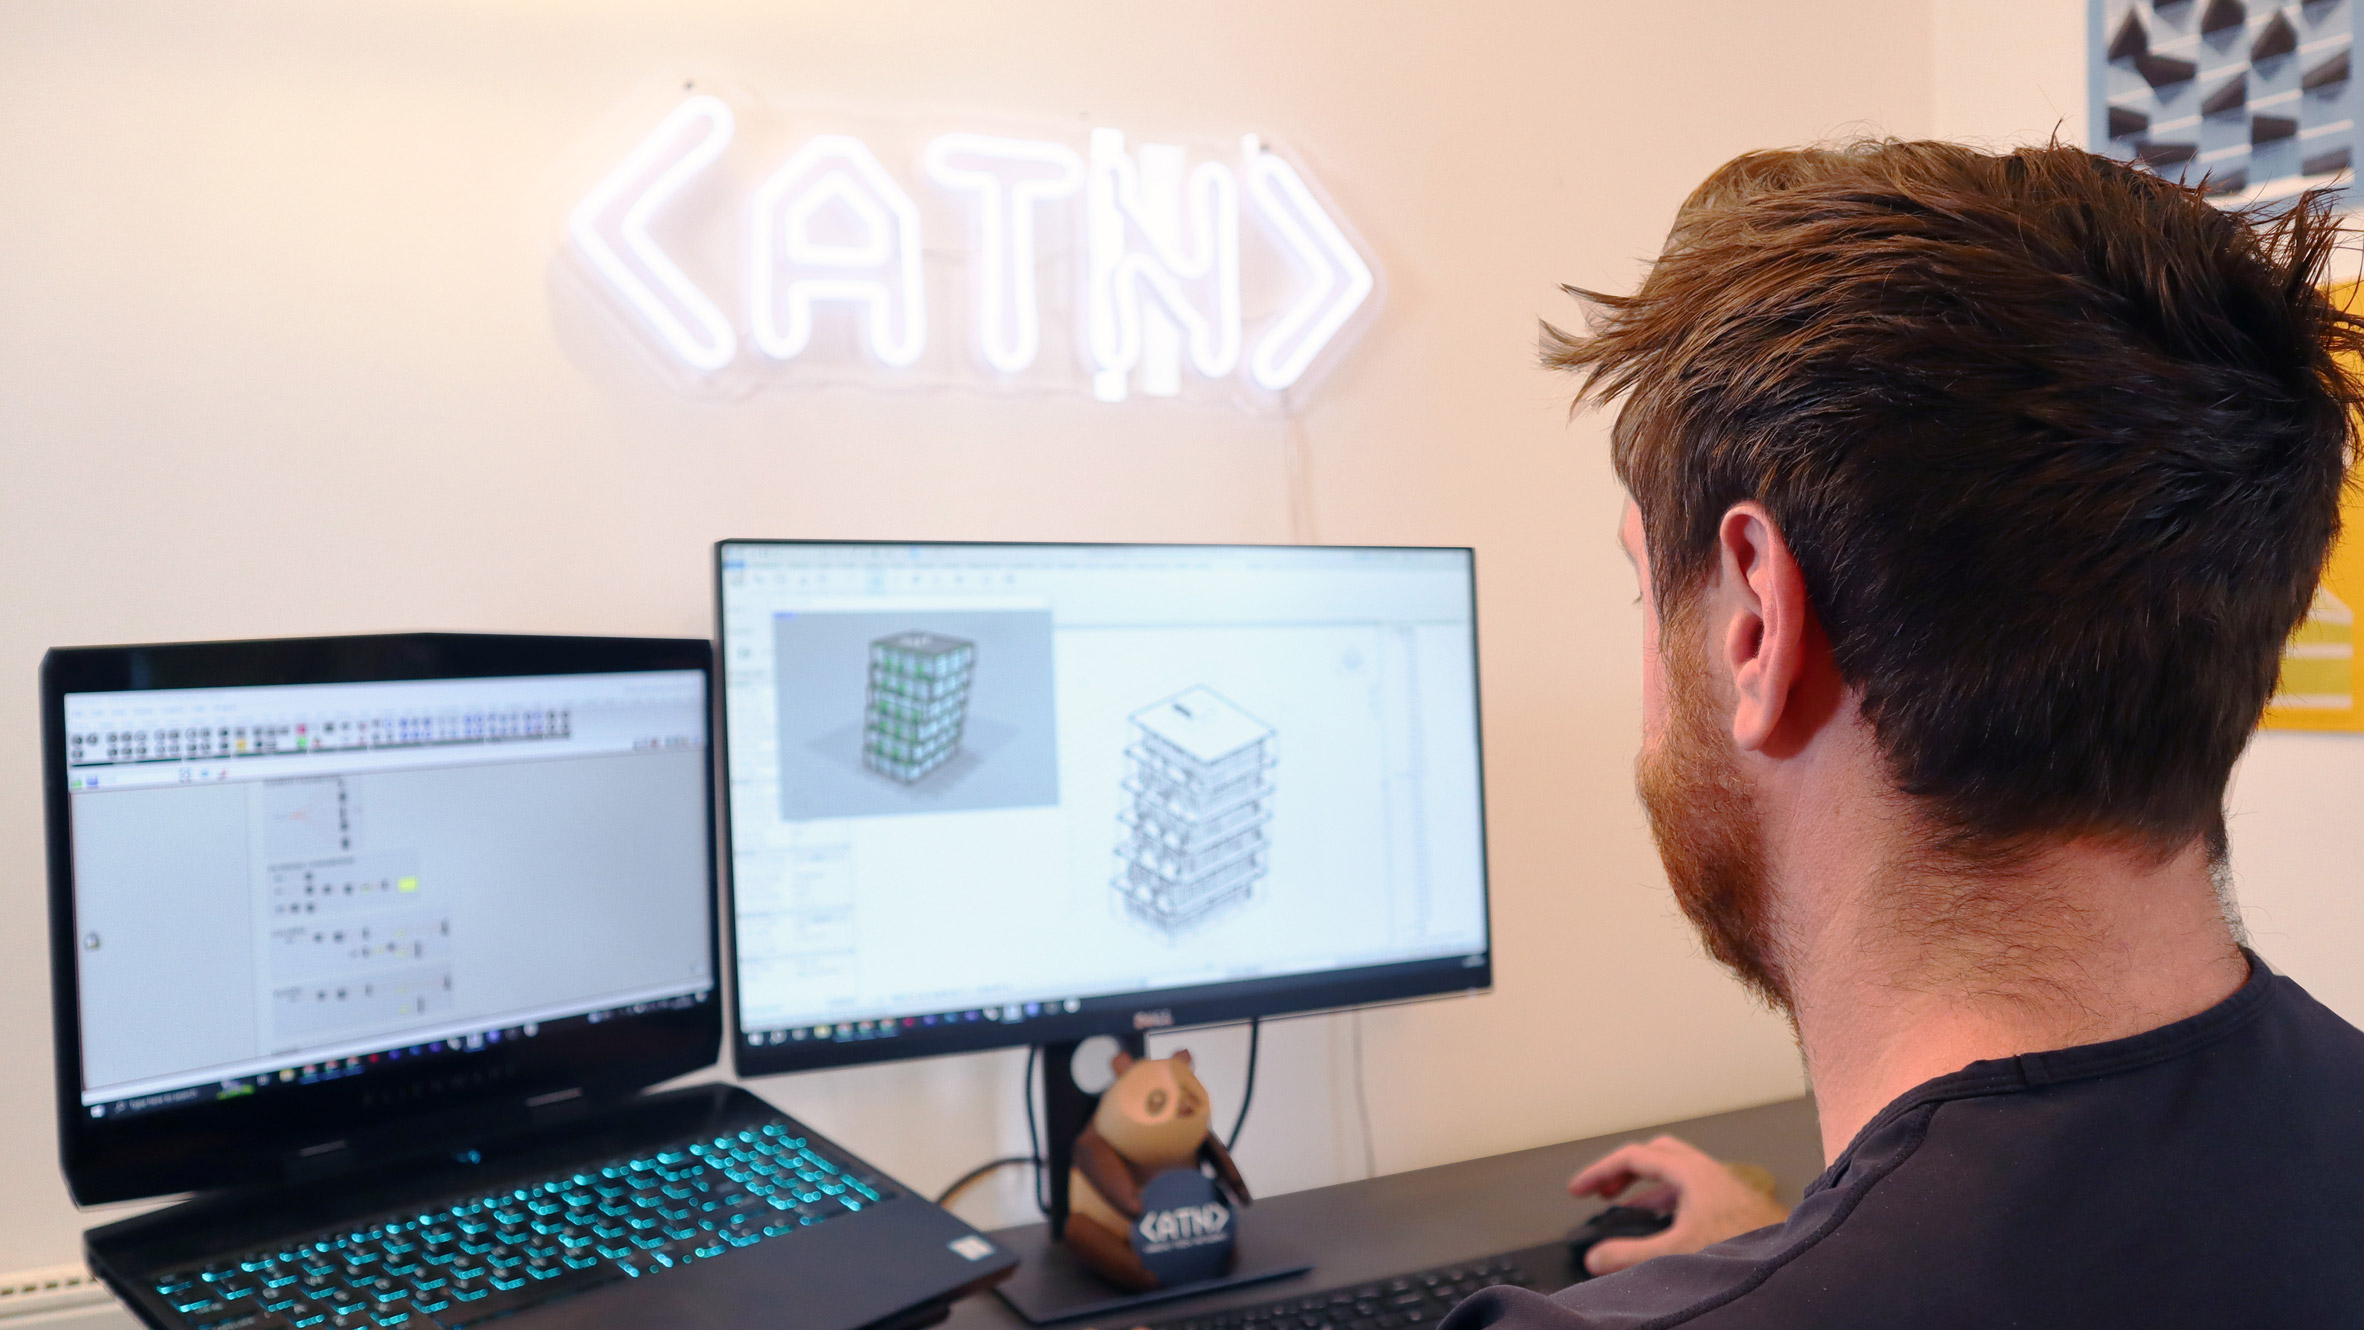 ArchiTech course student working on 3D digital Architectural model